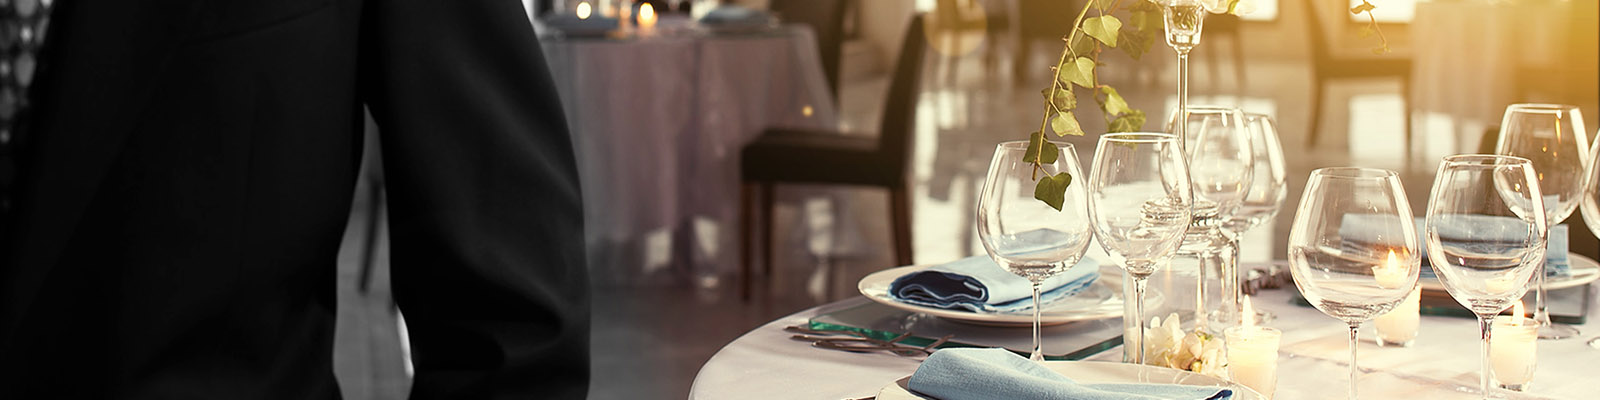 Hospitality Web Design for Restaurants and Hotels